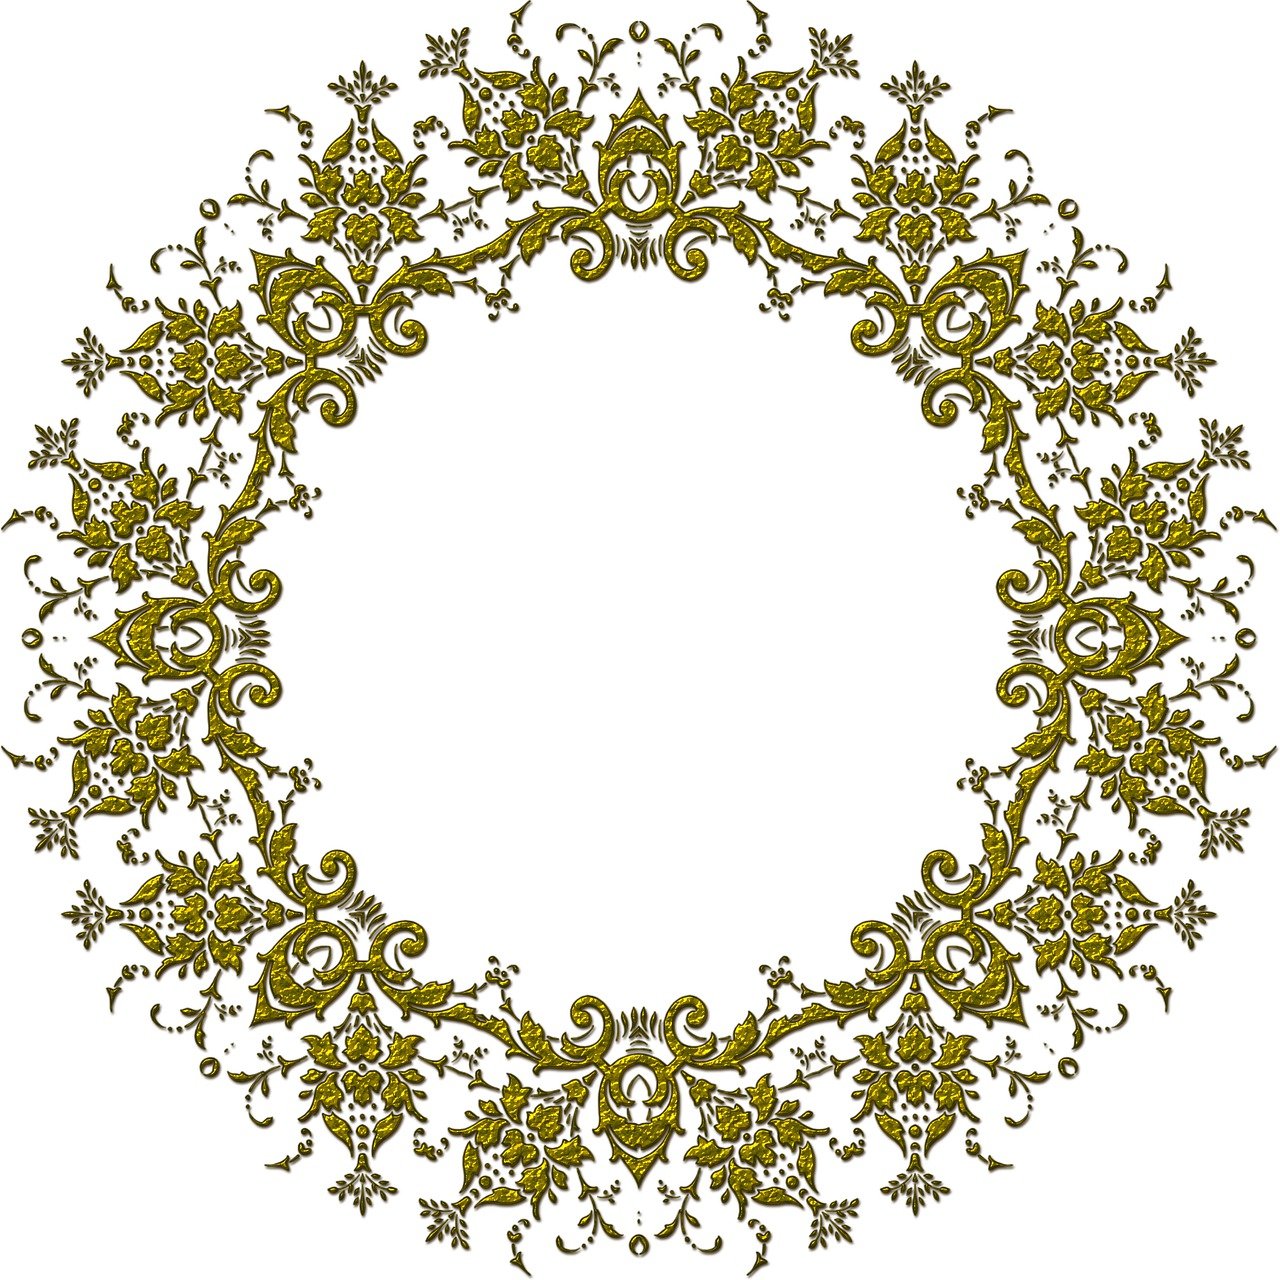 a circular frame with vines and leaves on a white background, a digital rendering, inspired by Master of the Embroidered Foliage, baroque, golden lace pattern, !!! very coherent!!! vector art, orthodox, restored color